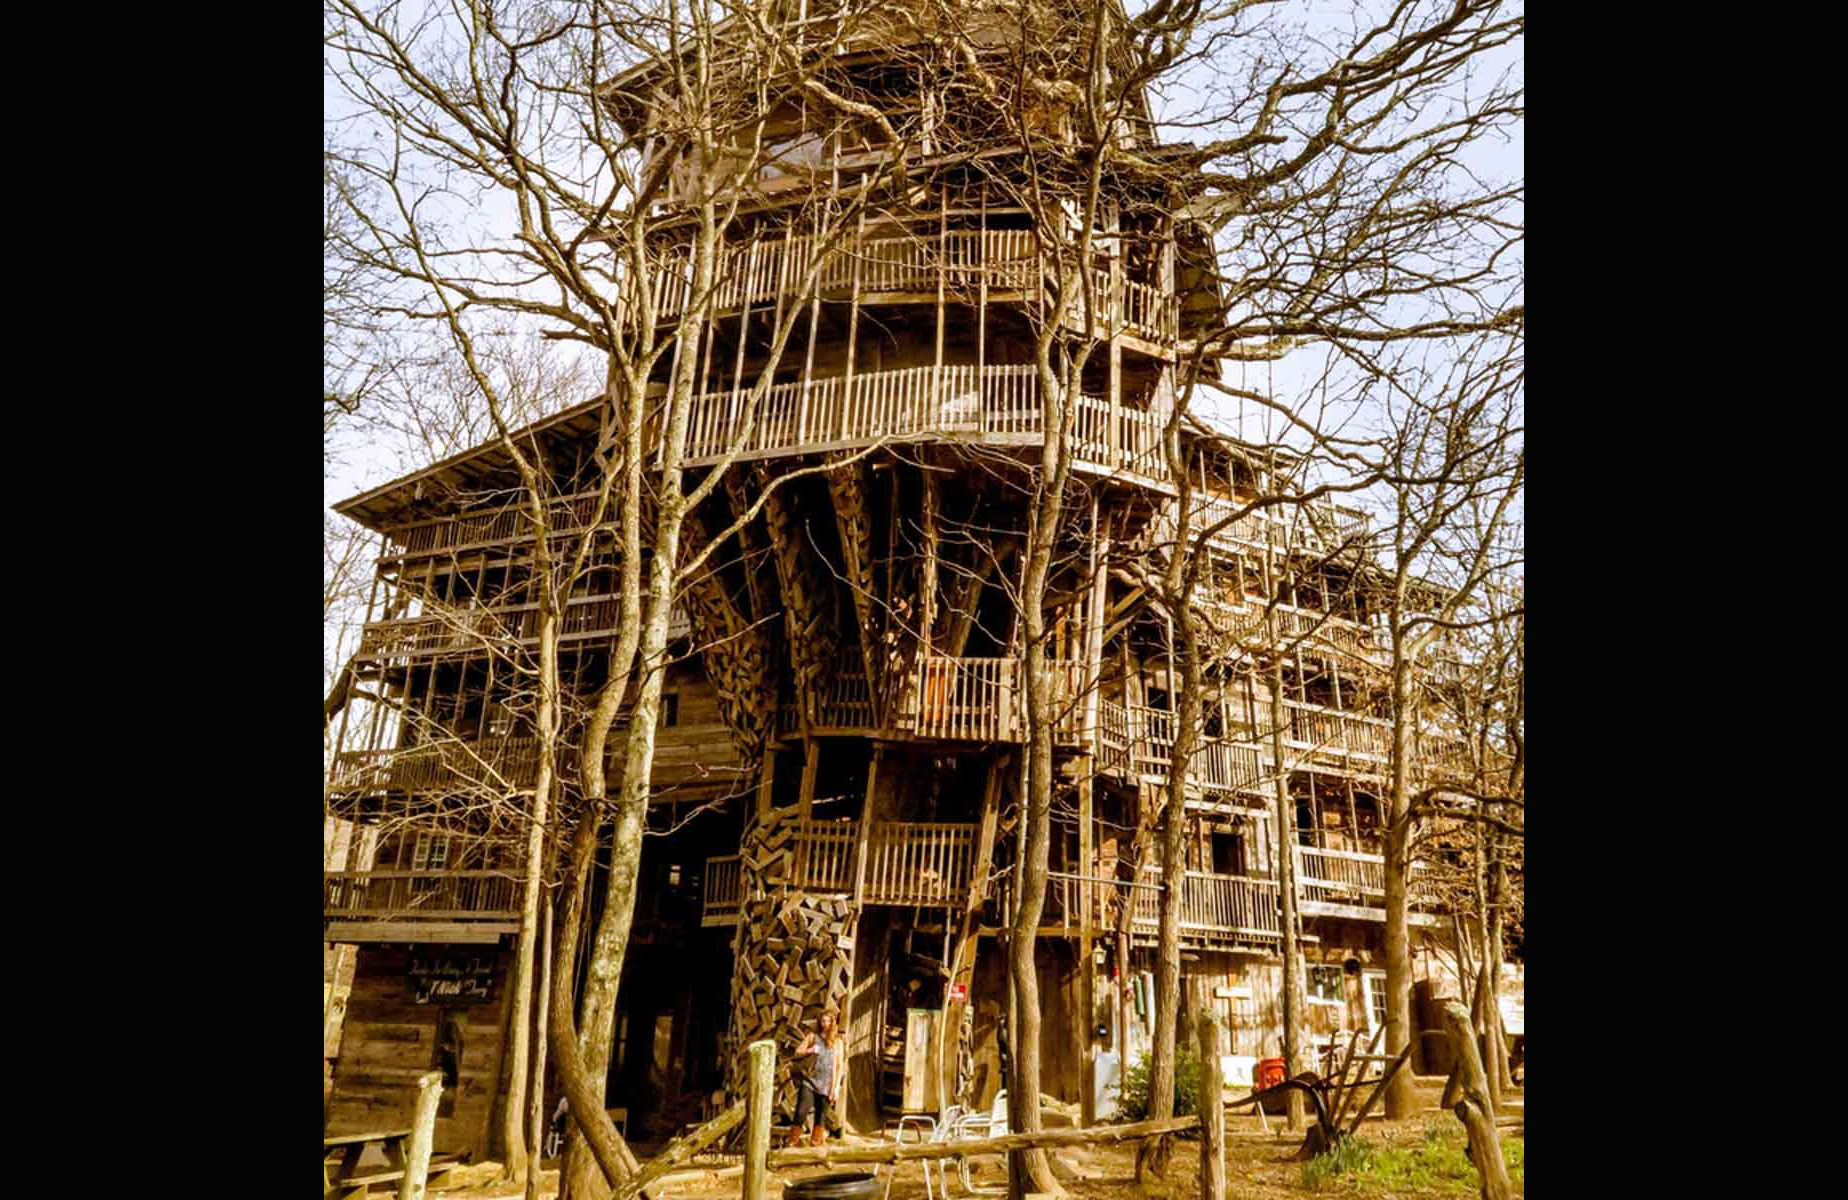 The Minister’s Treehouse